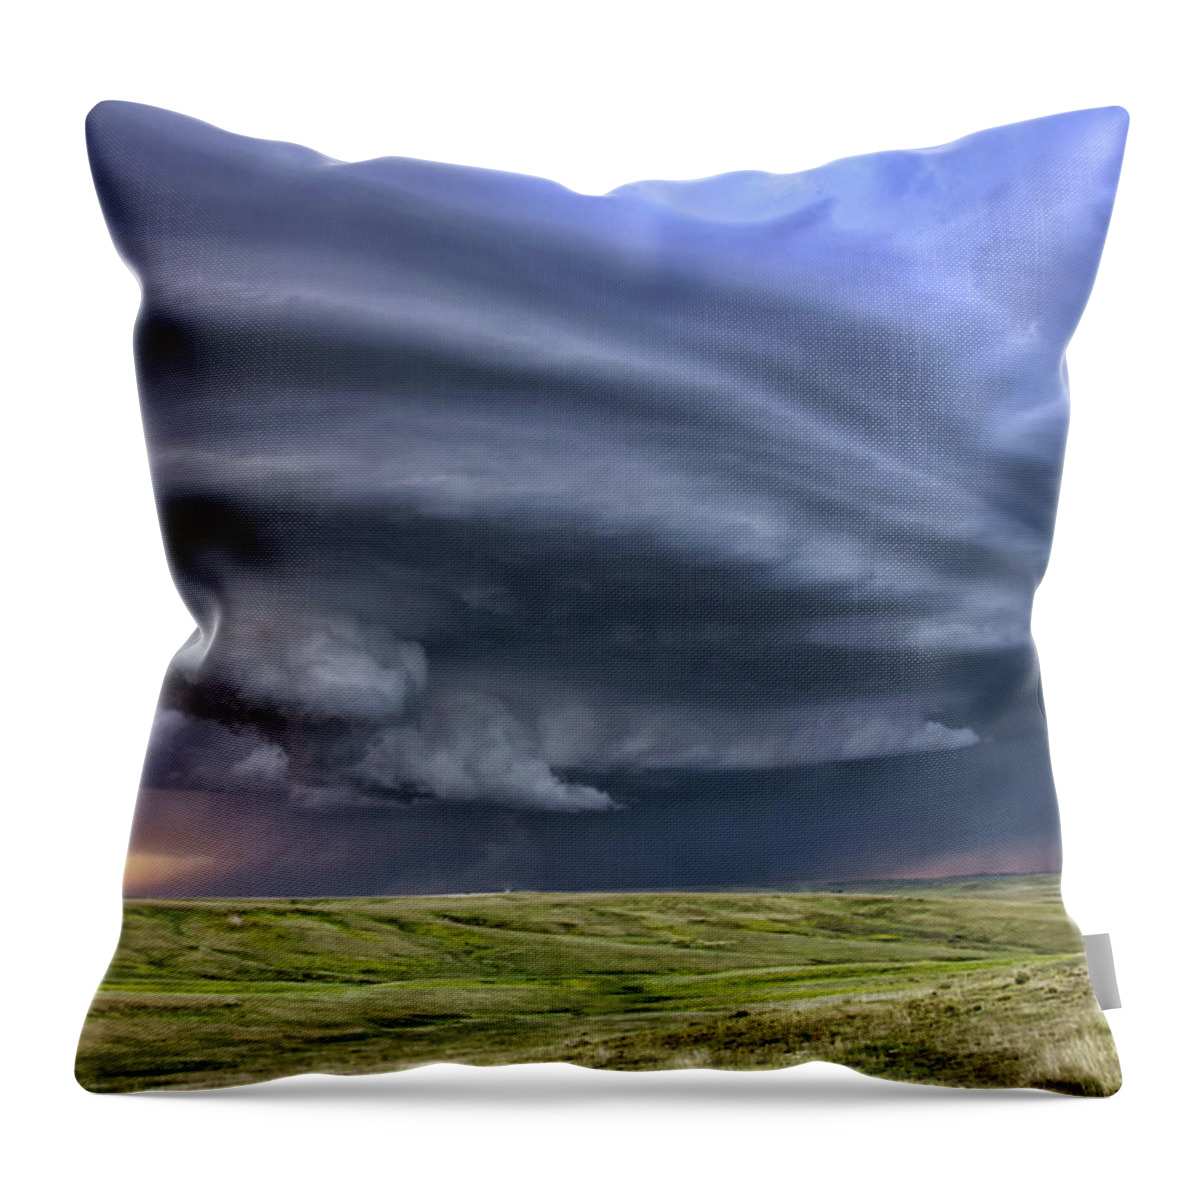 Risk Throw Pillow featuring the photograph Anticyclonic Supercell Thunderstorm by Jason Persoff Stormdoctor